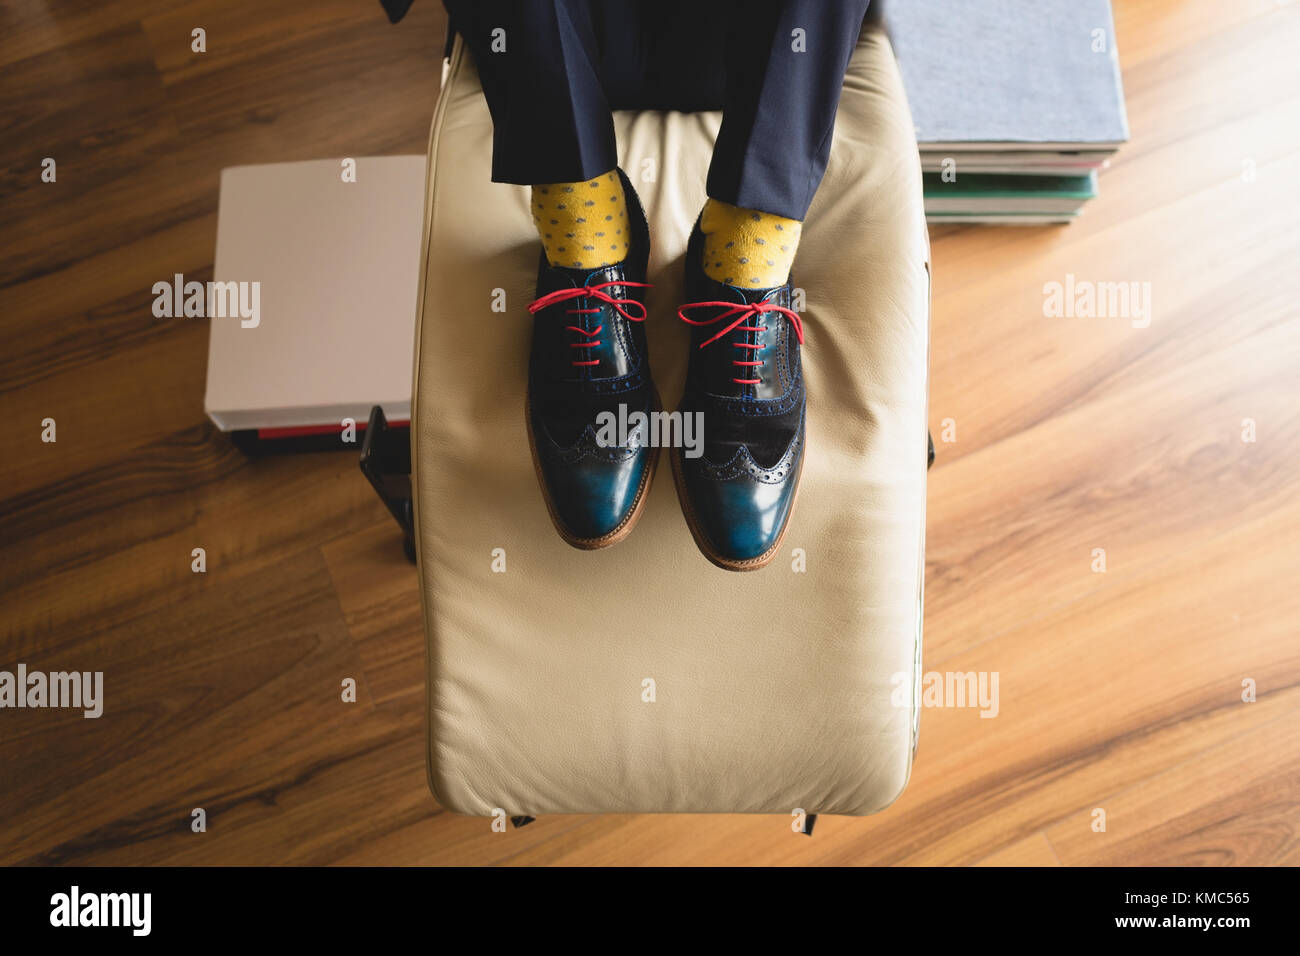 Man in black formal shoes relaxing in living room Stock Photo